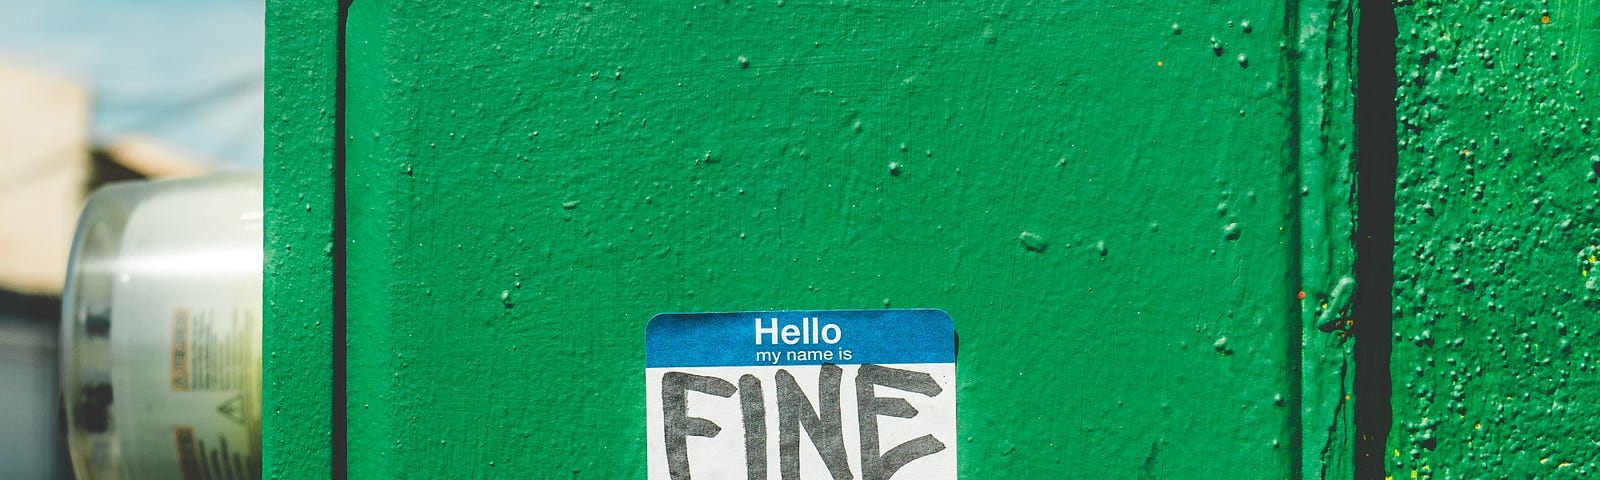 Image of green electric meter outside of building with a name tag sticker “Hello my name is” with the word “FINE” in black sharpie.